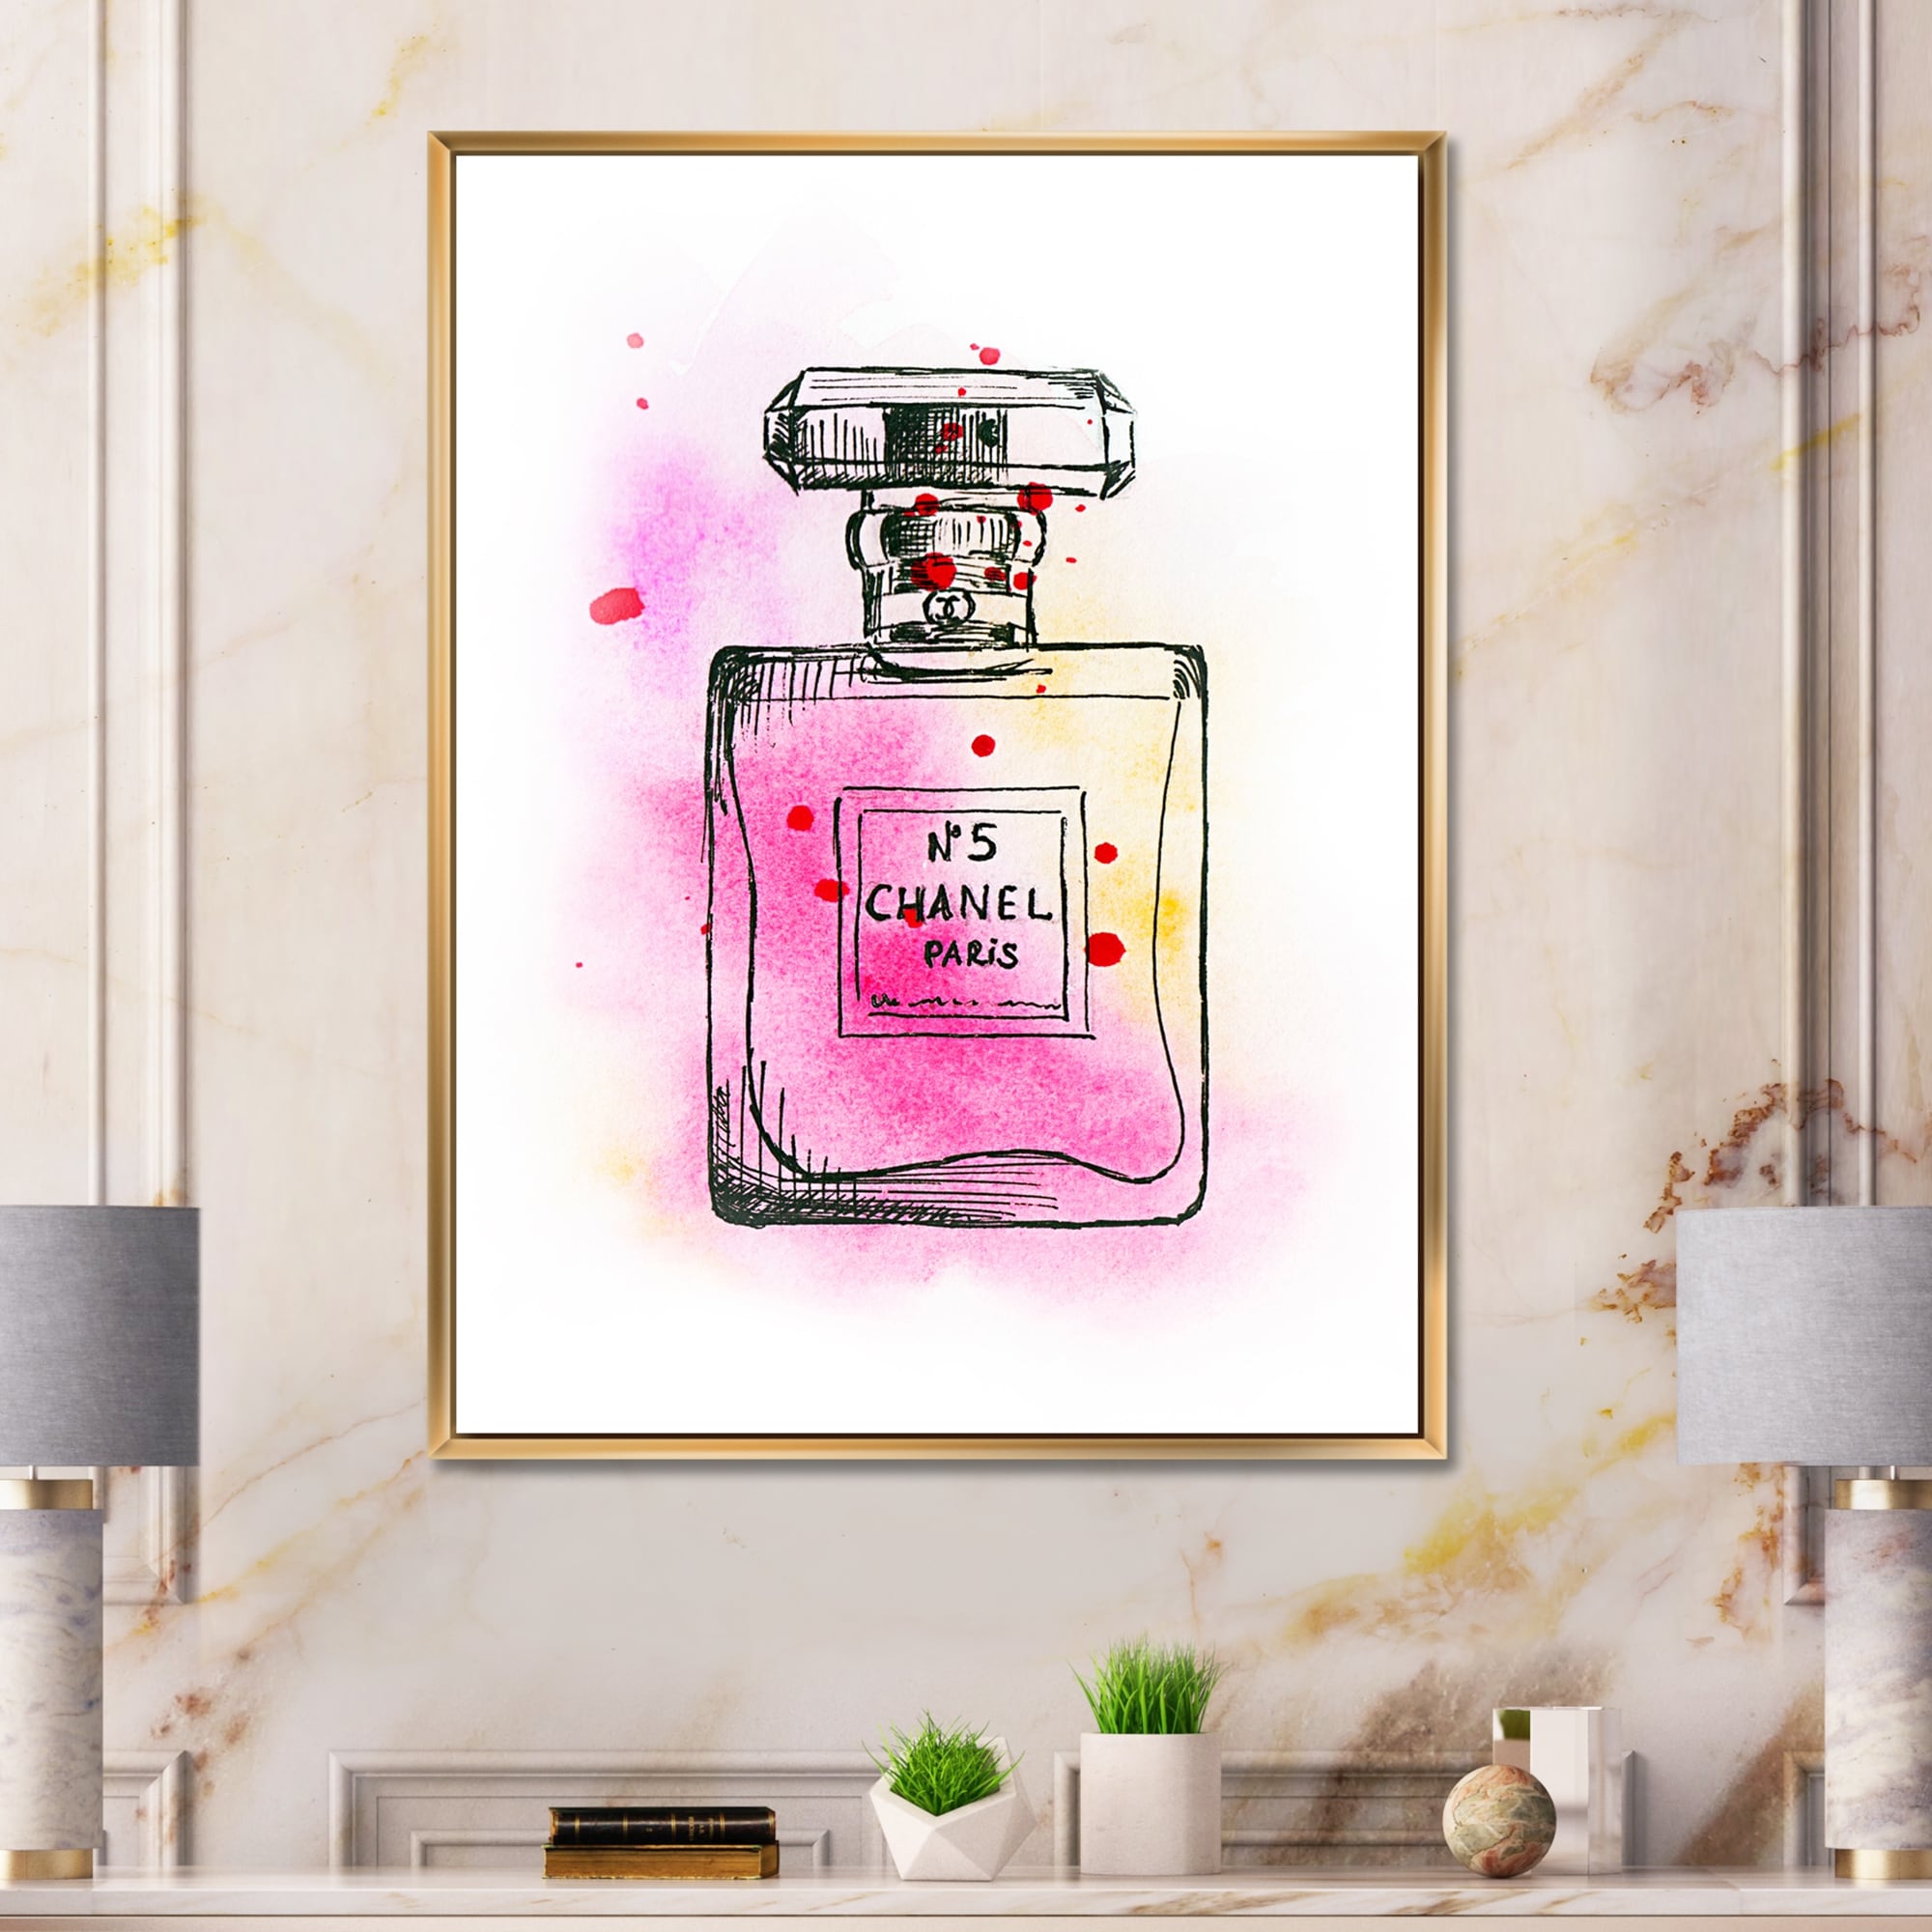 Designart Perfume Chanel Five IV French Country Framed Canvas Wall Art  Print - On Sale - Bed Bath & Beyond - 33753961